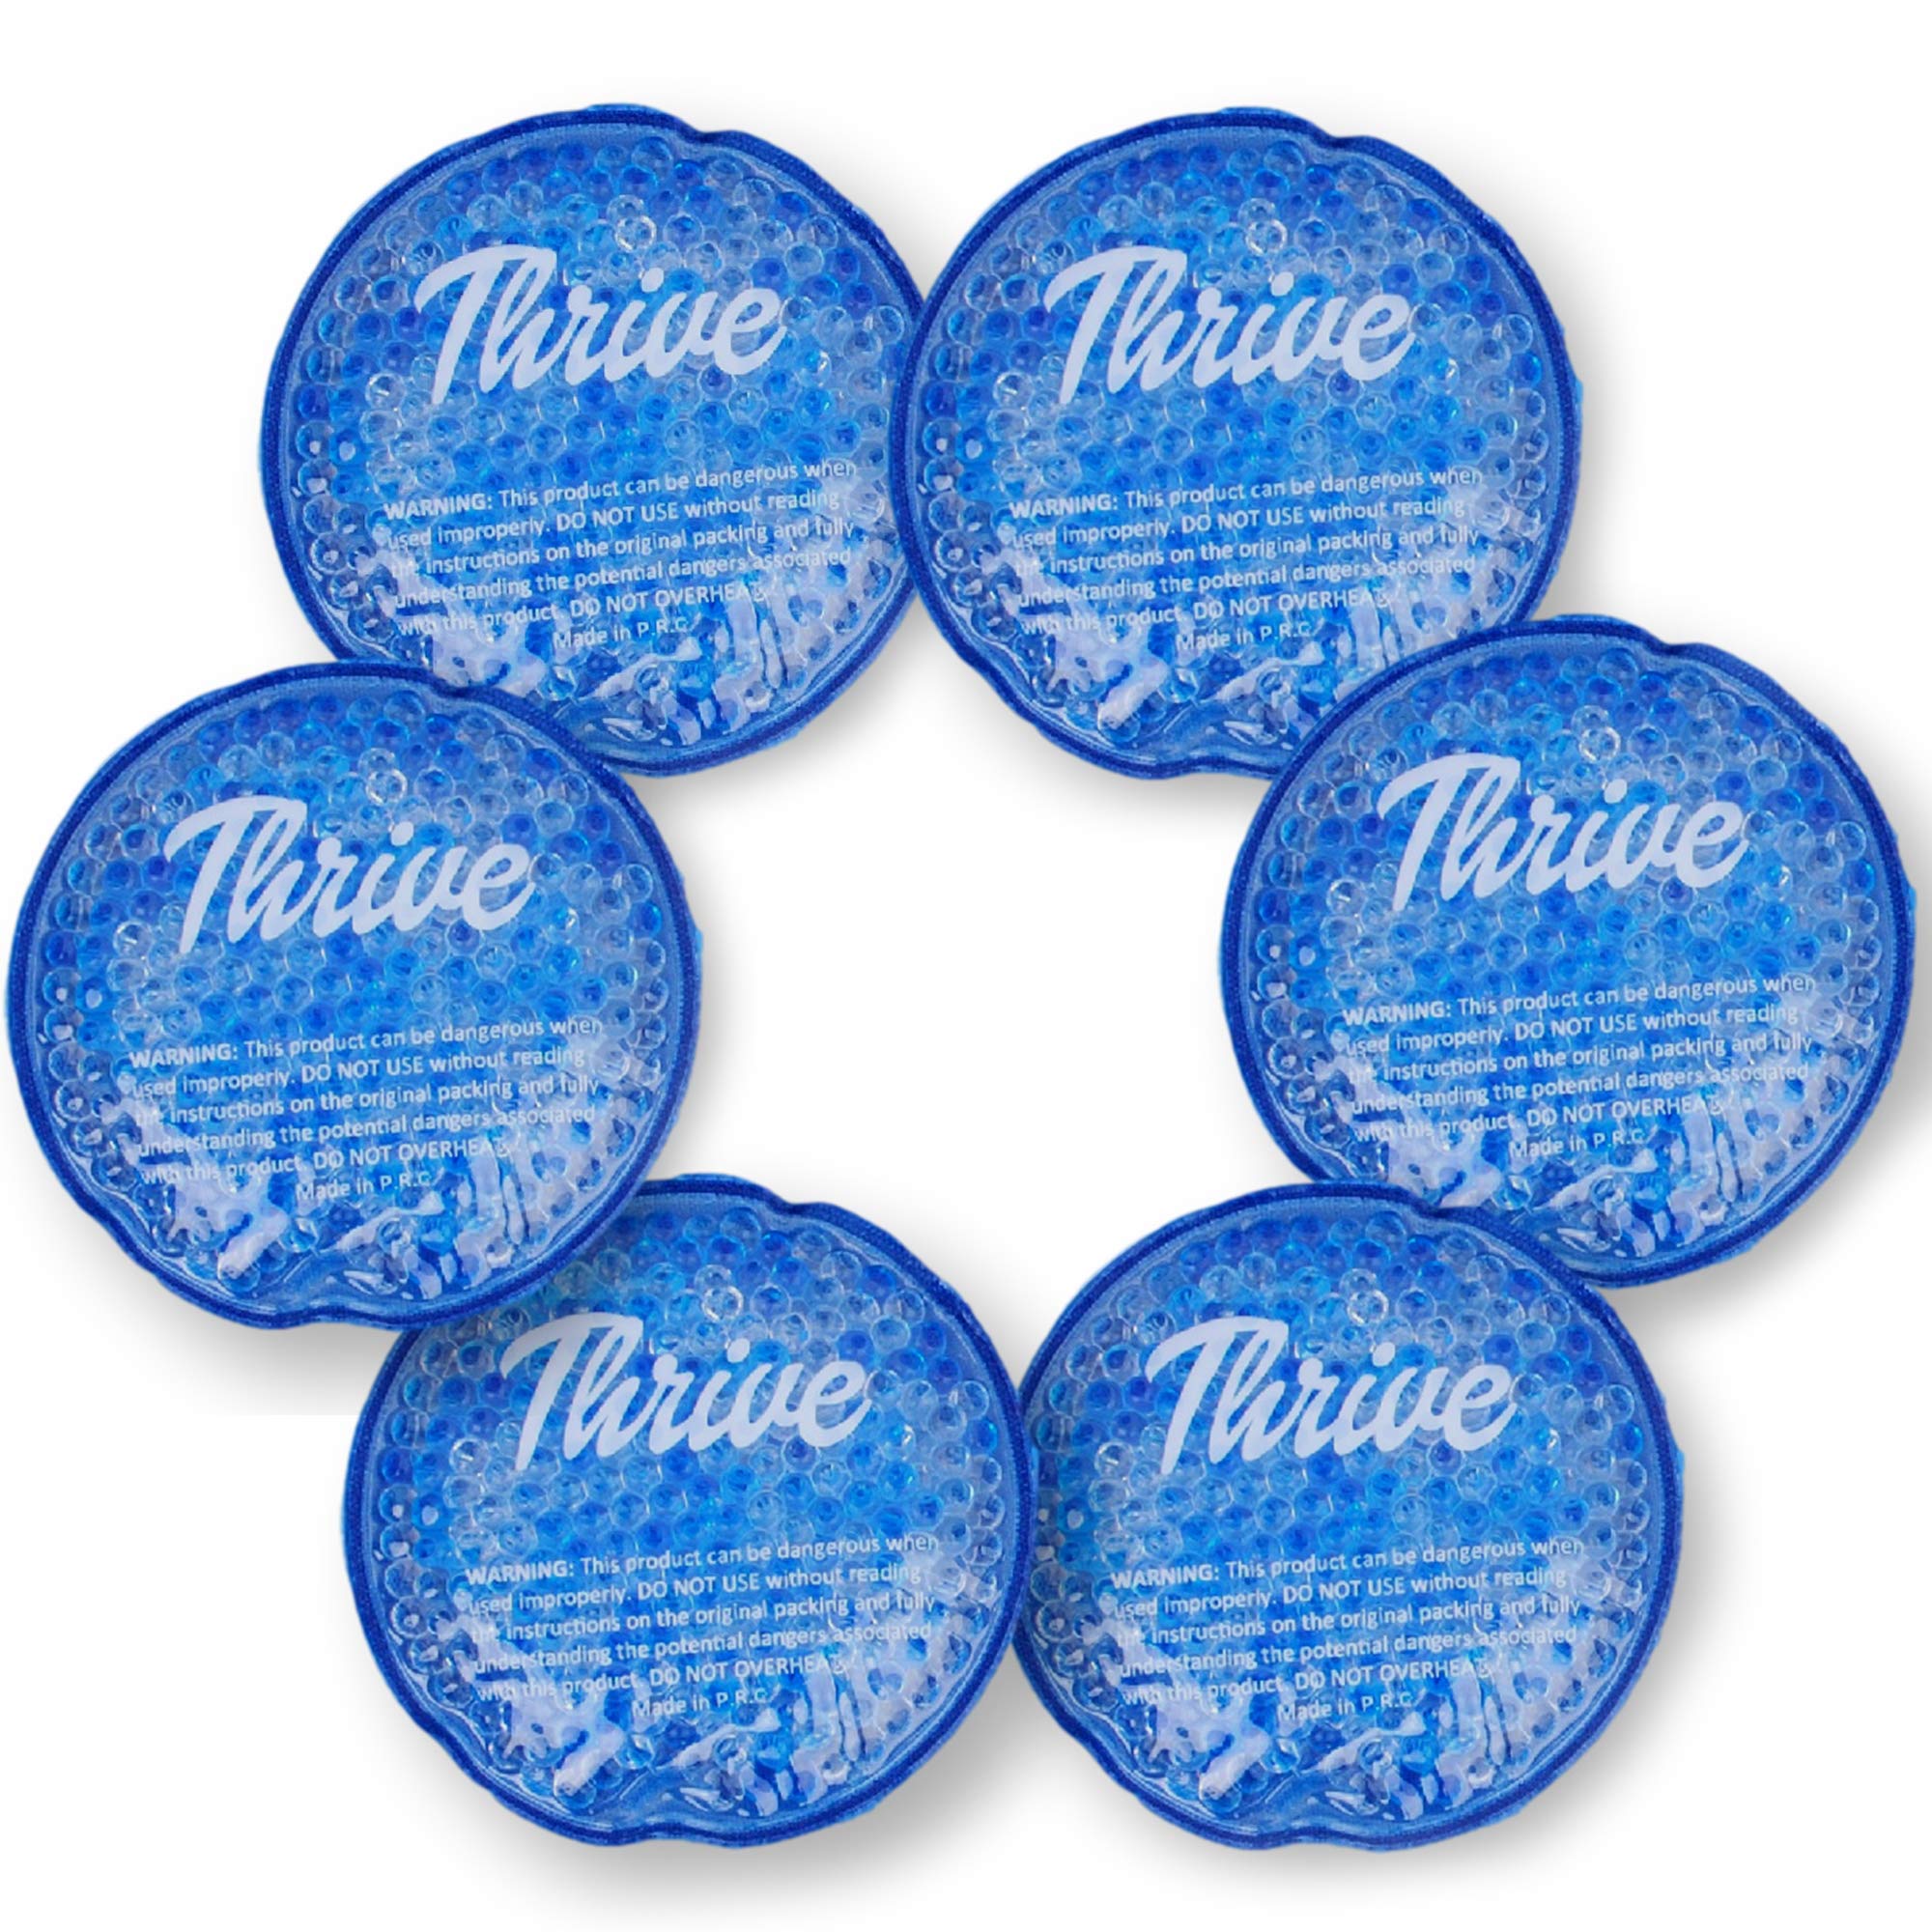 Thrive Round Hot & Cold Ice Packs (6 Pack) – FSA HSA Approved Product - Reusable Gel Bead Ice Pack w/Cloth Fabric Backing – Hot and Cold Pack for Tired Eyes, Sinus Relief